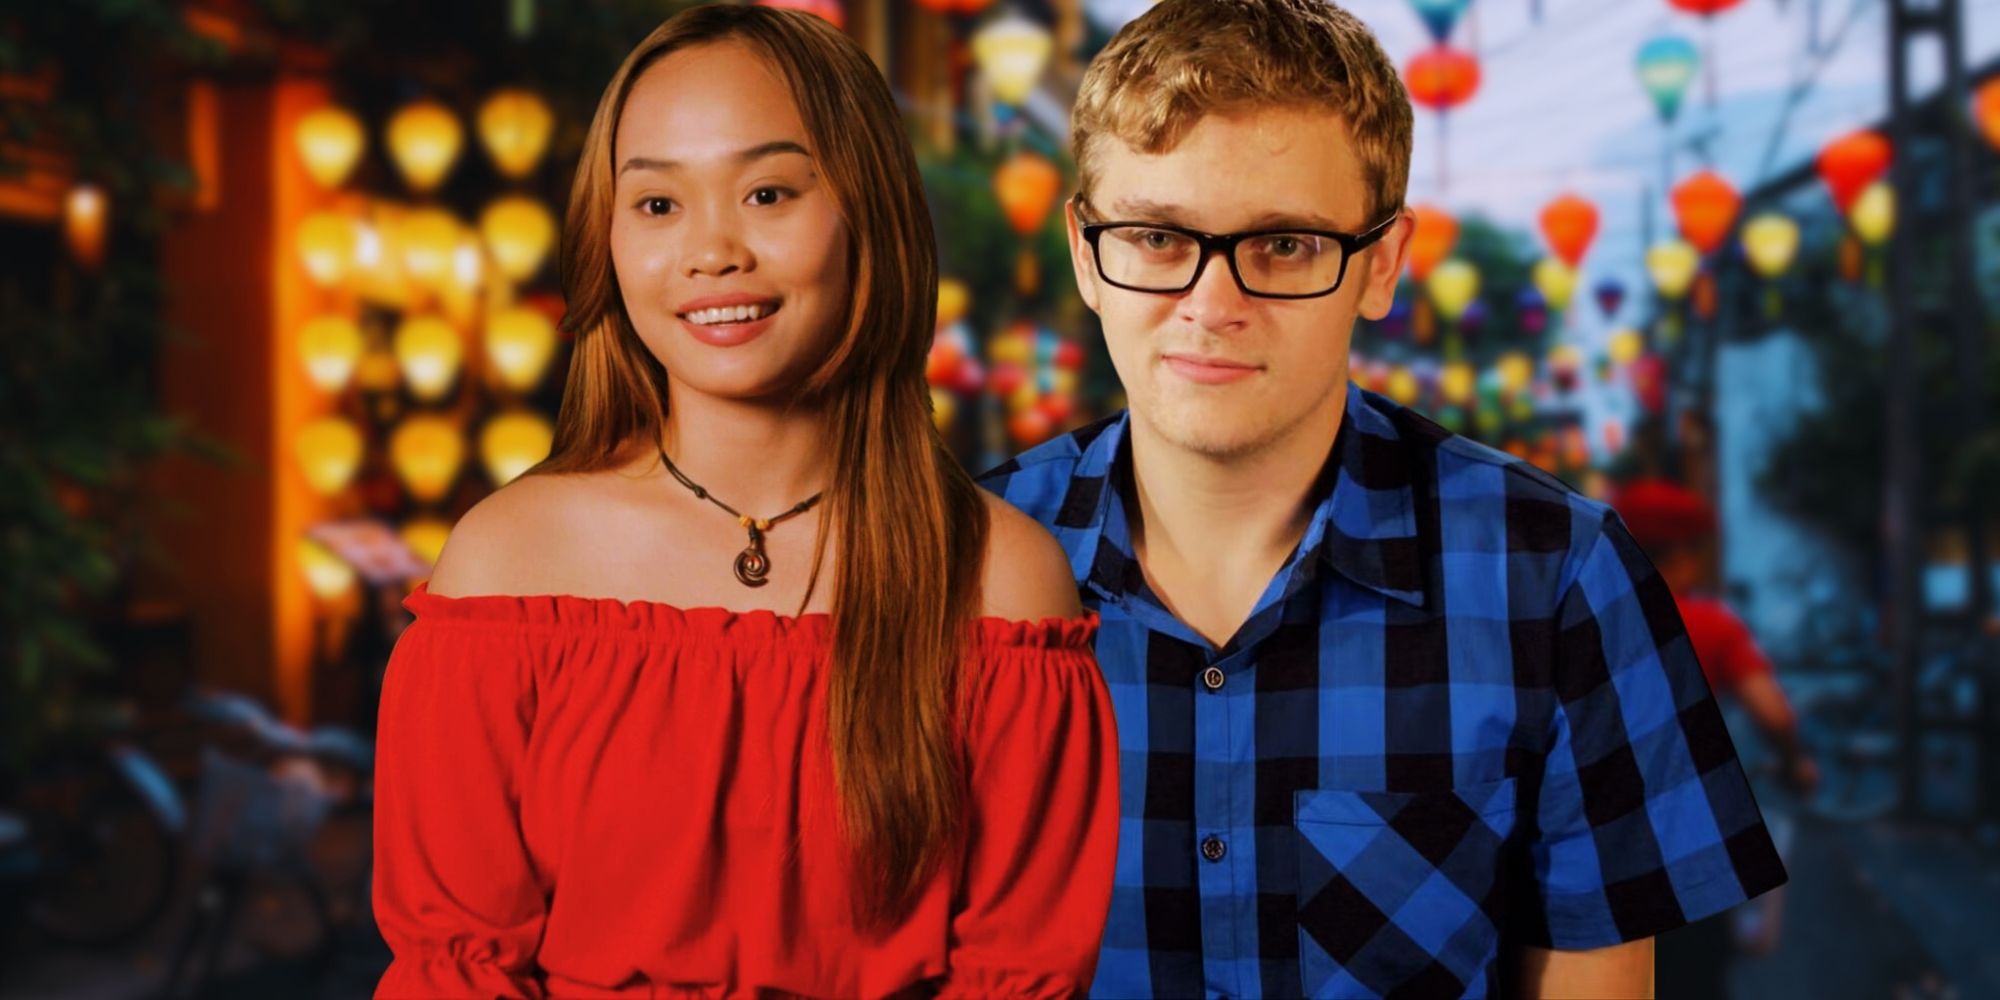 90 Day Fiancé: The Other Way – Mary May Be Pregnant (Brandan’s Mom Posted A Clue)